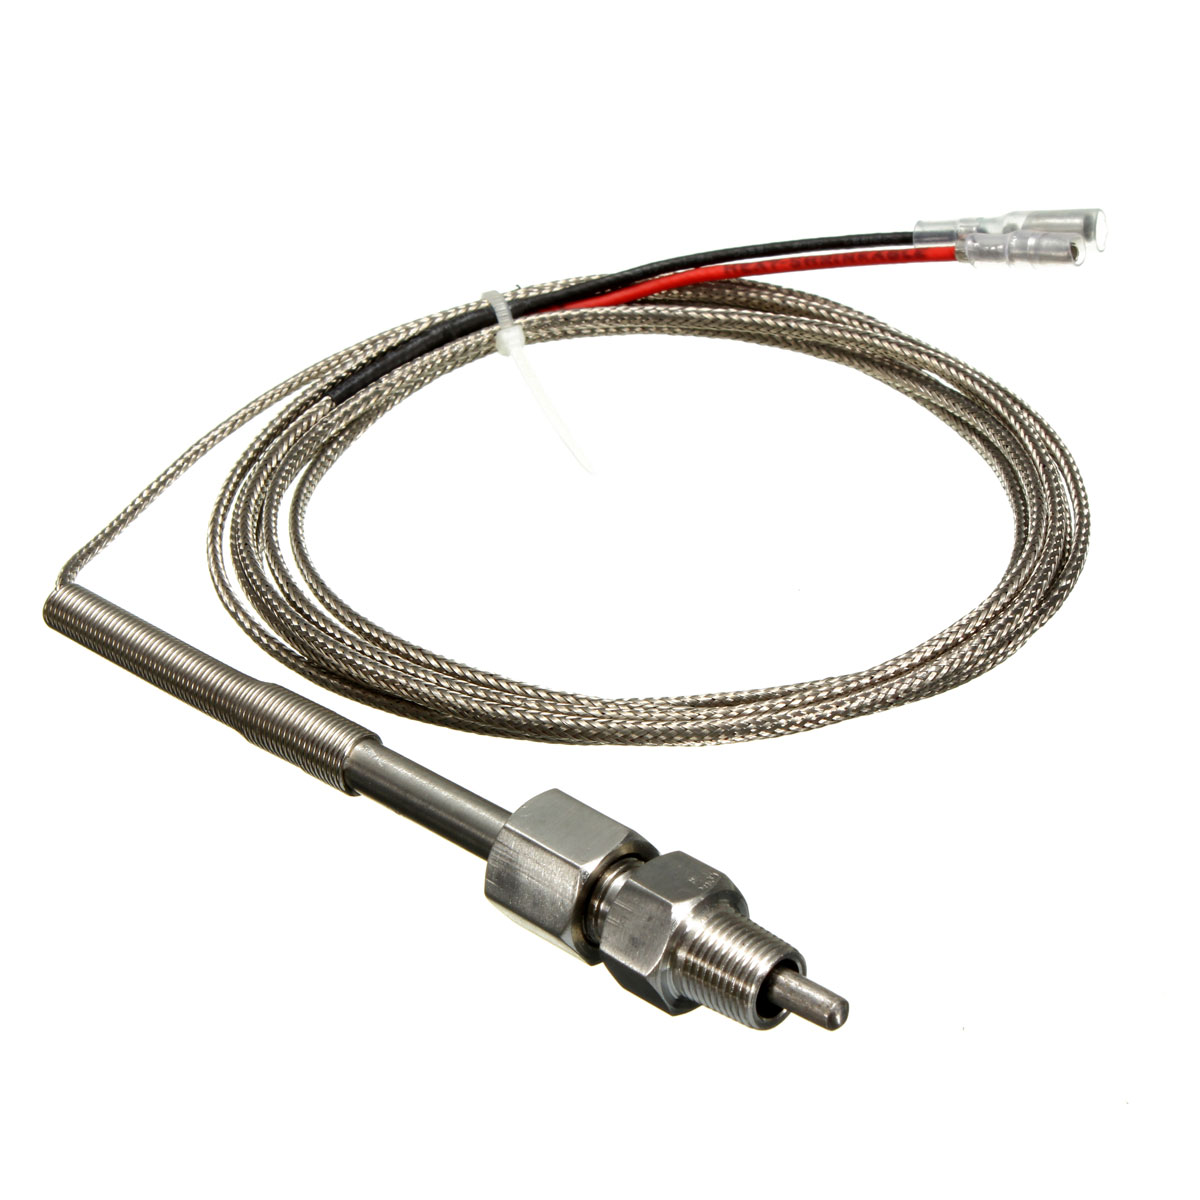 Type K EGT Thermocouple 1/4" x 2" Stainless Steel Probe 35" Long W/ Male Fitting 